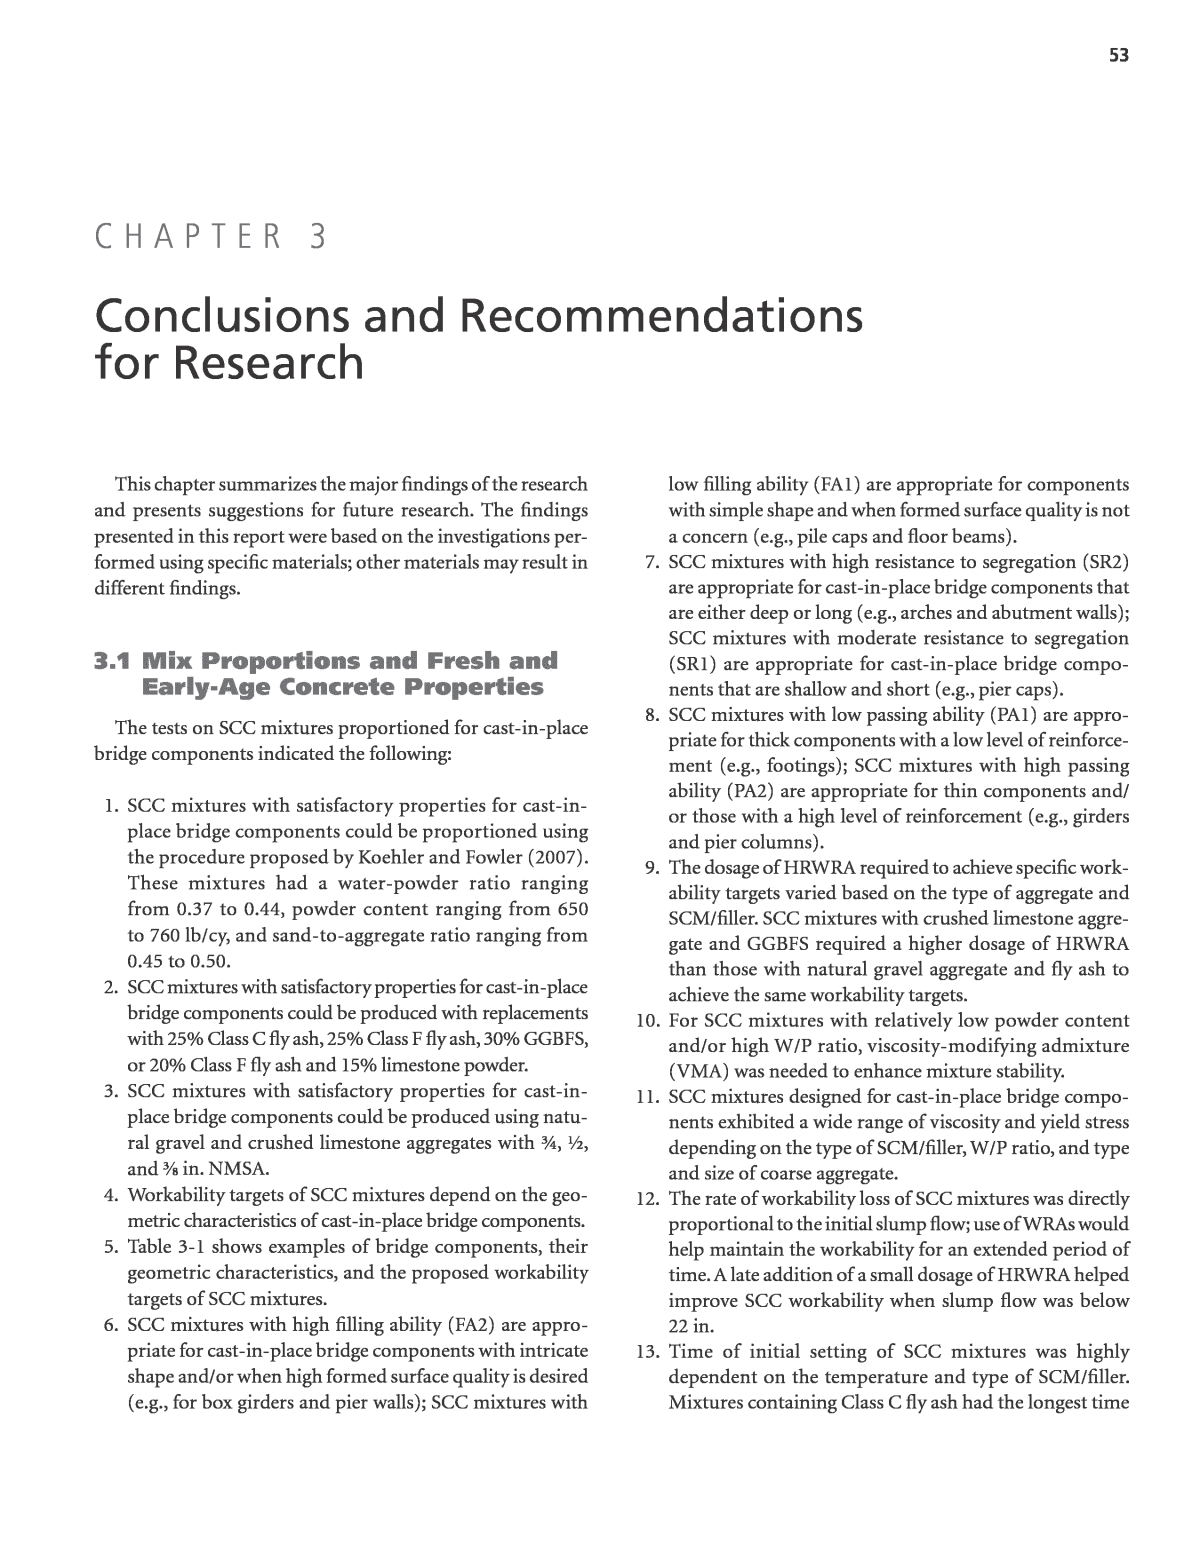 how to write recommendation for research paper